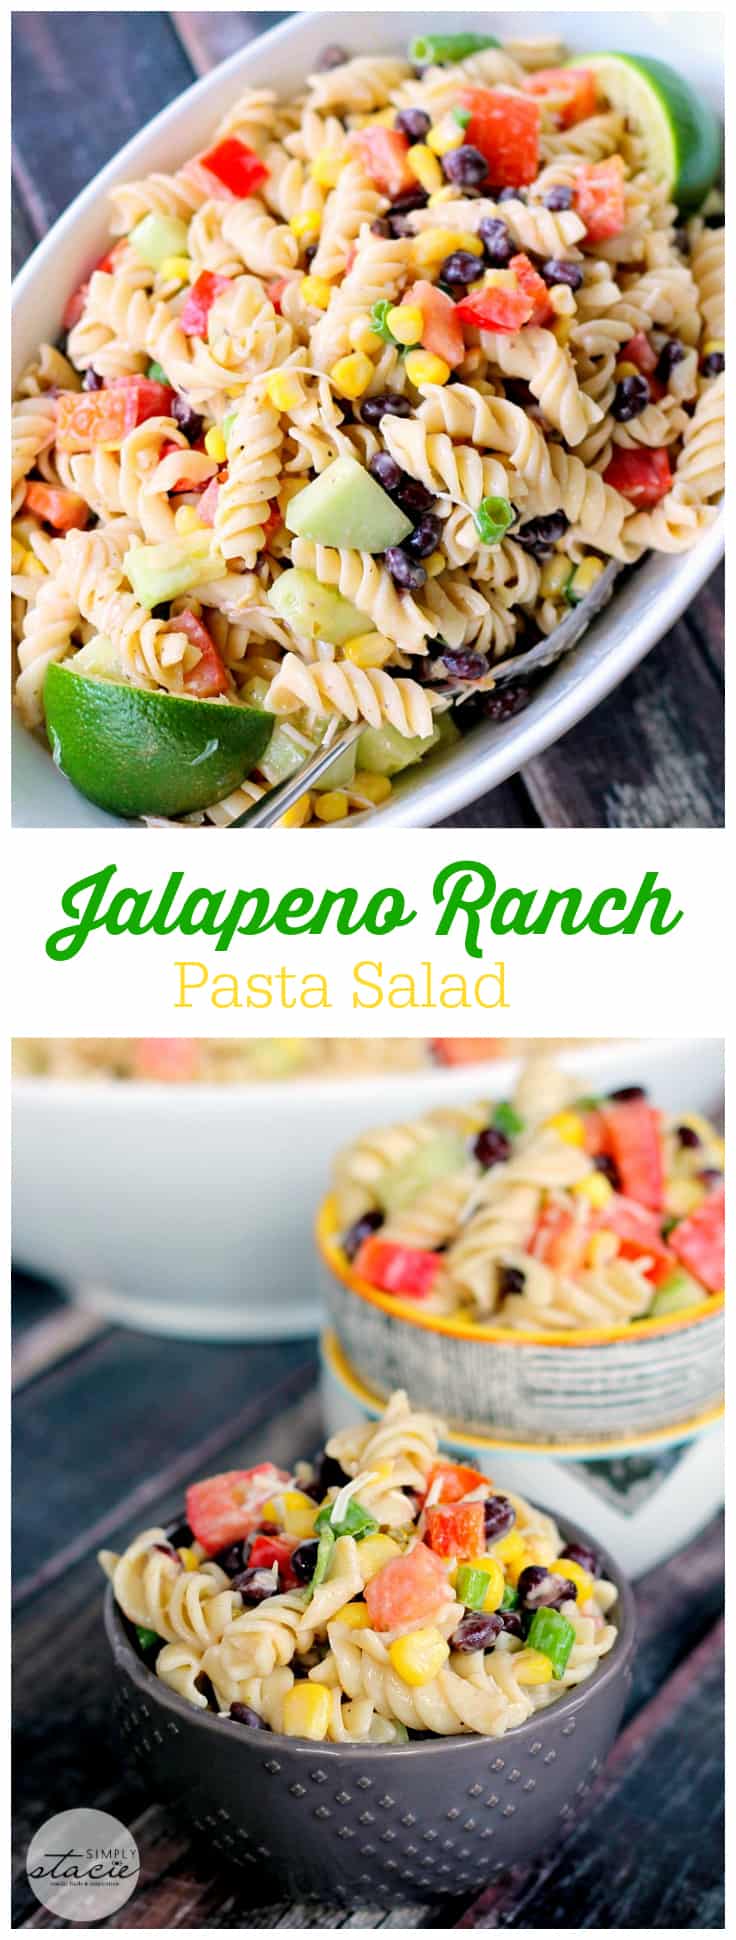 Jalapeno Ranch Pasta Salad - Smothered in a creamy, homemade ranch dressing with a kick of flavour. It’s loaded with veggies and black beans to give it a southwest edge.